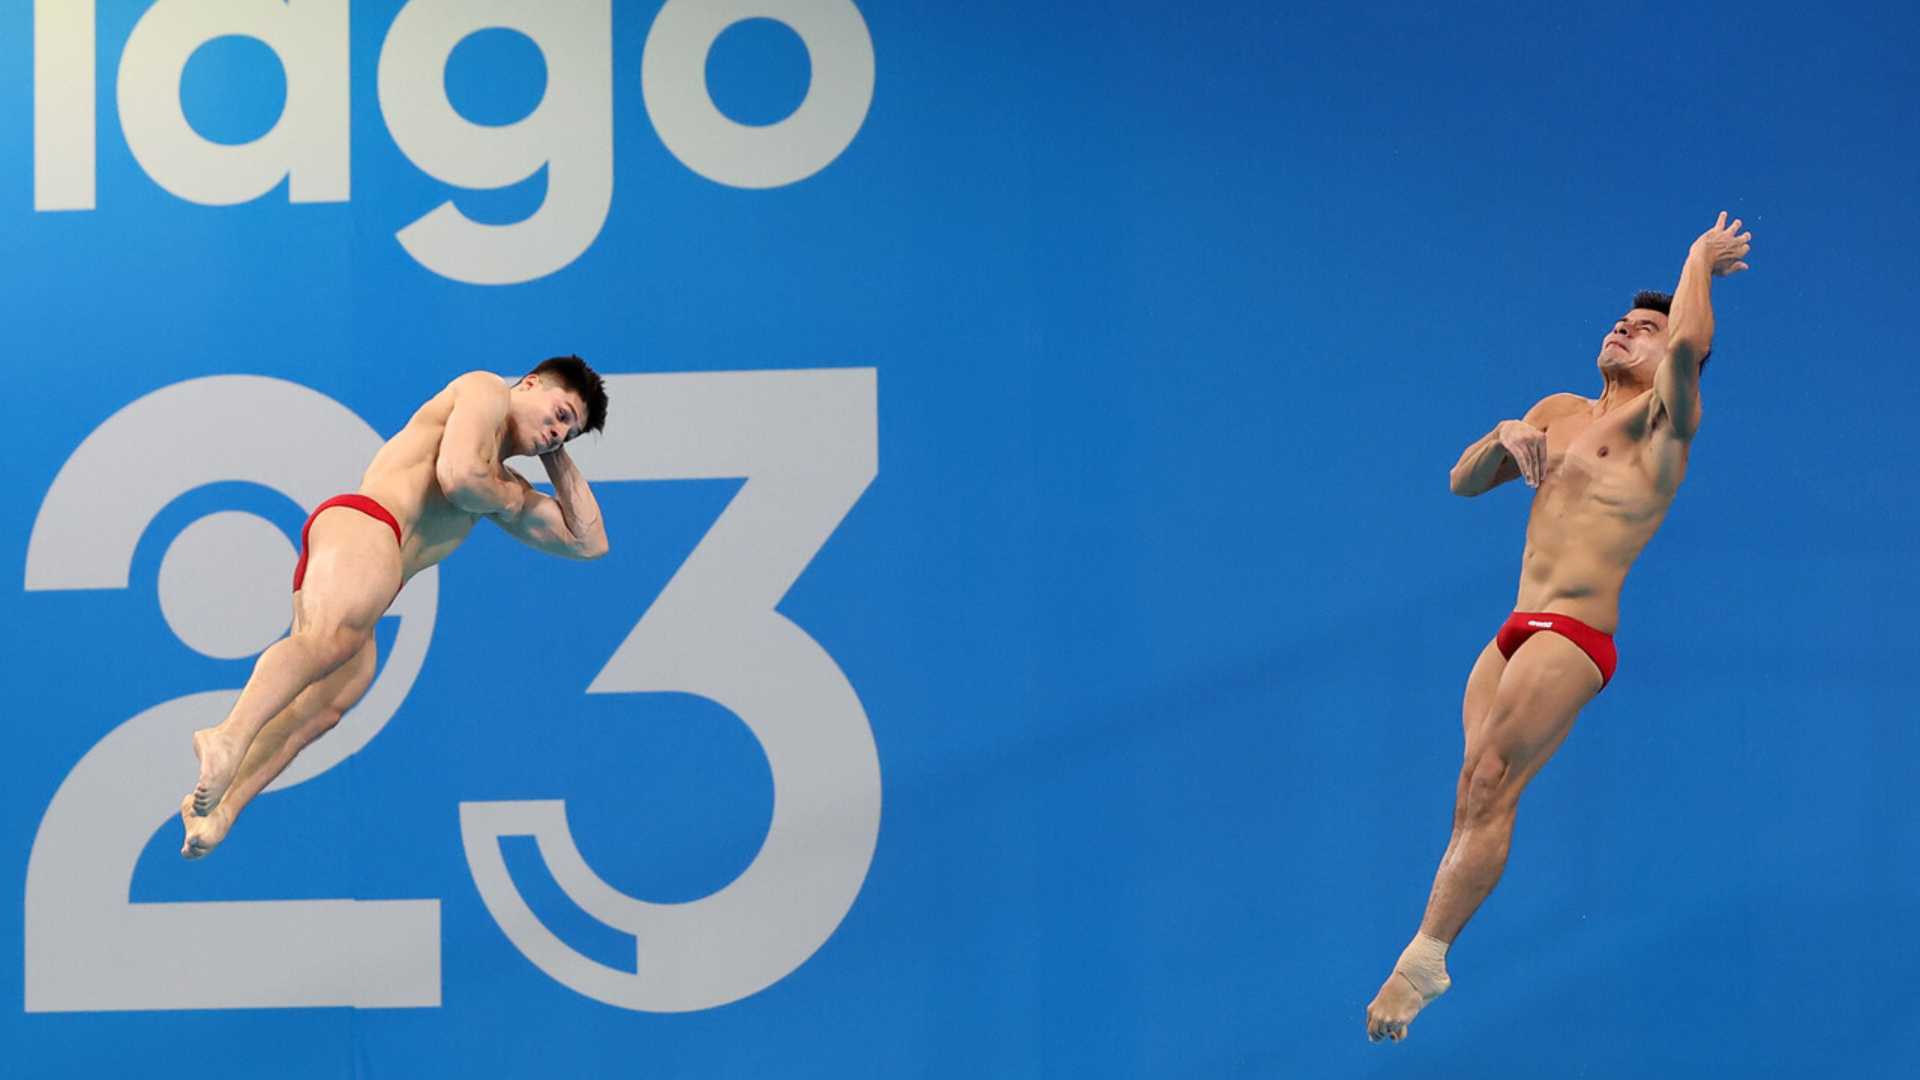 Mexican Olvera achieves his third gold by winning in synchronized 3-meter spring